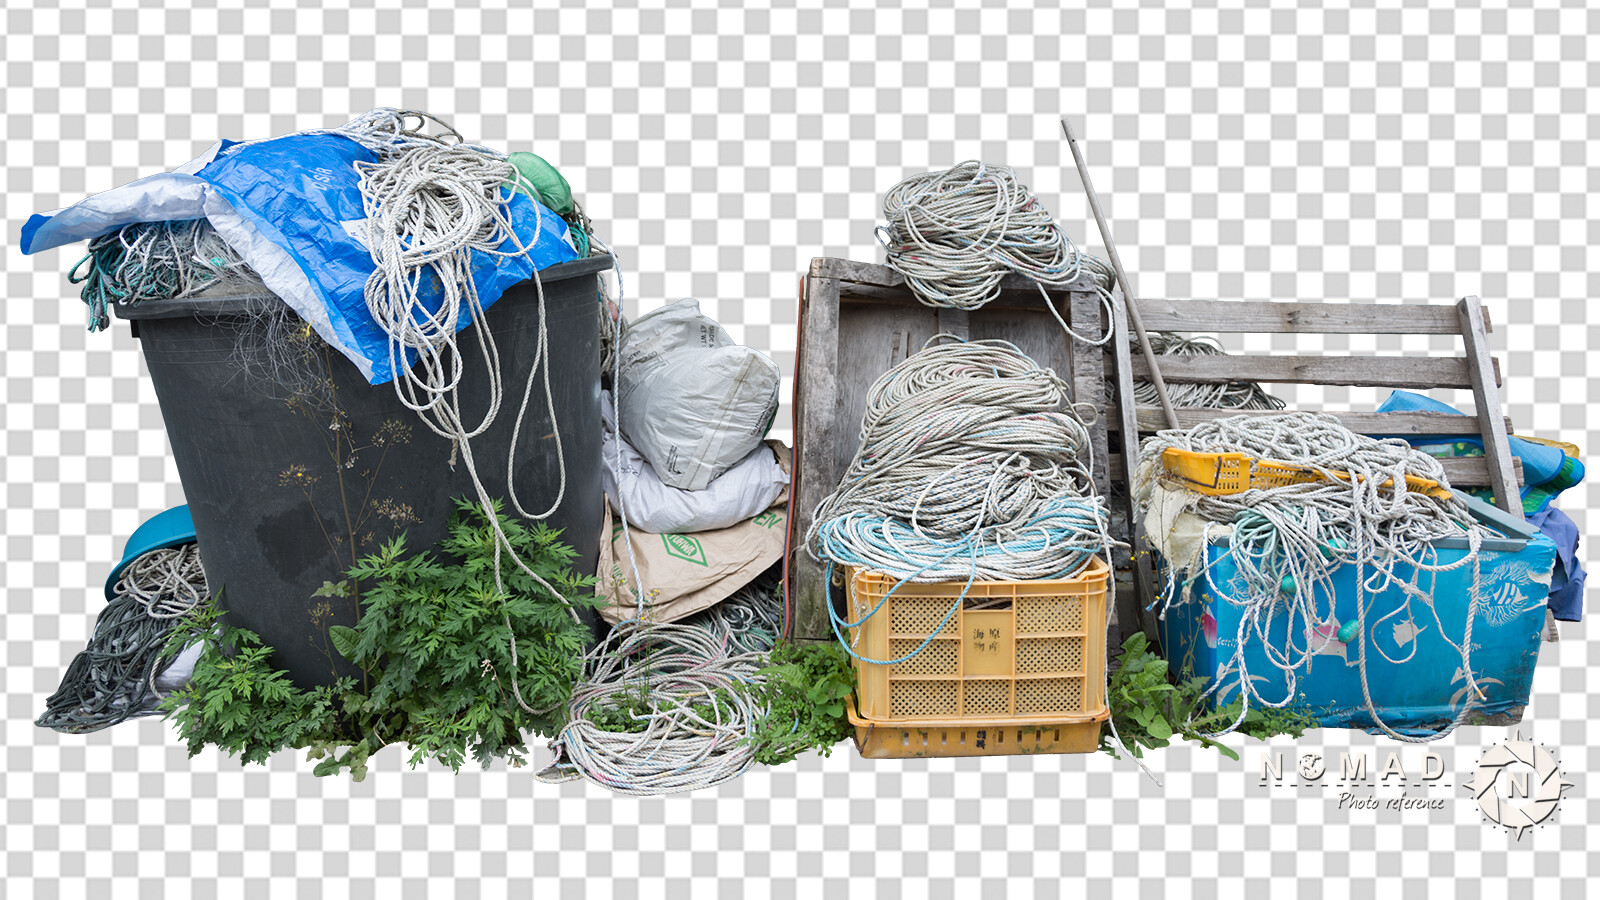 From the PNG Photo Pack: Junk and Trash Props

https://www.artstation.com/a/165705